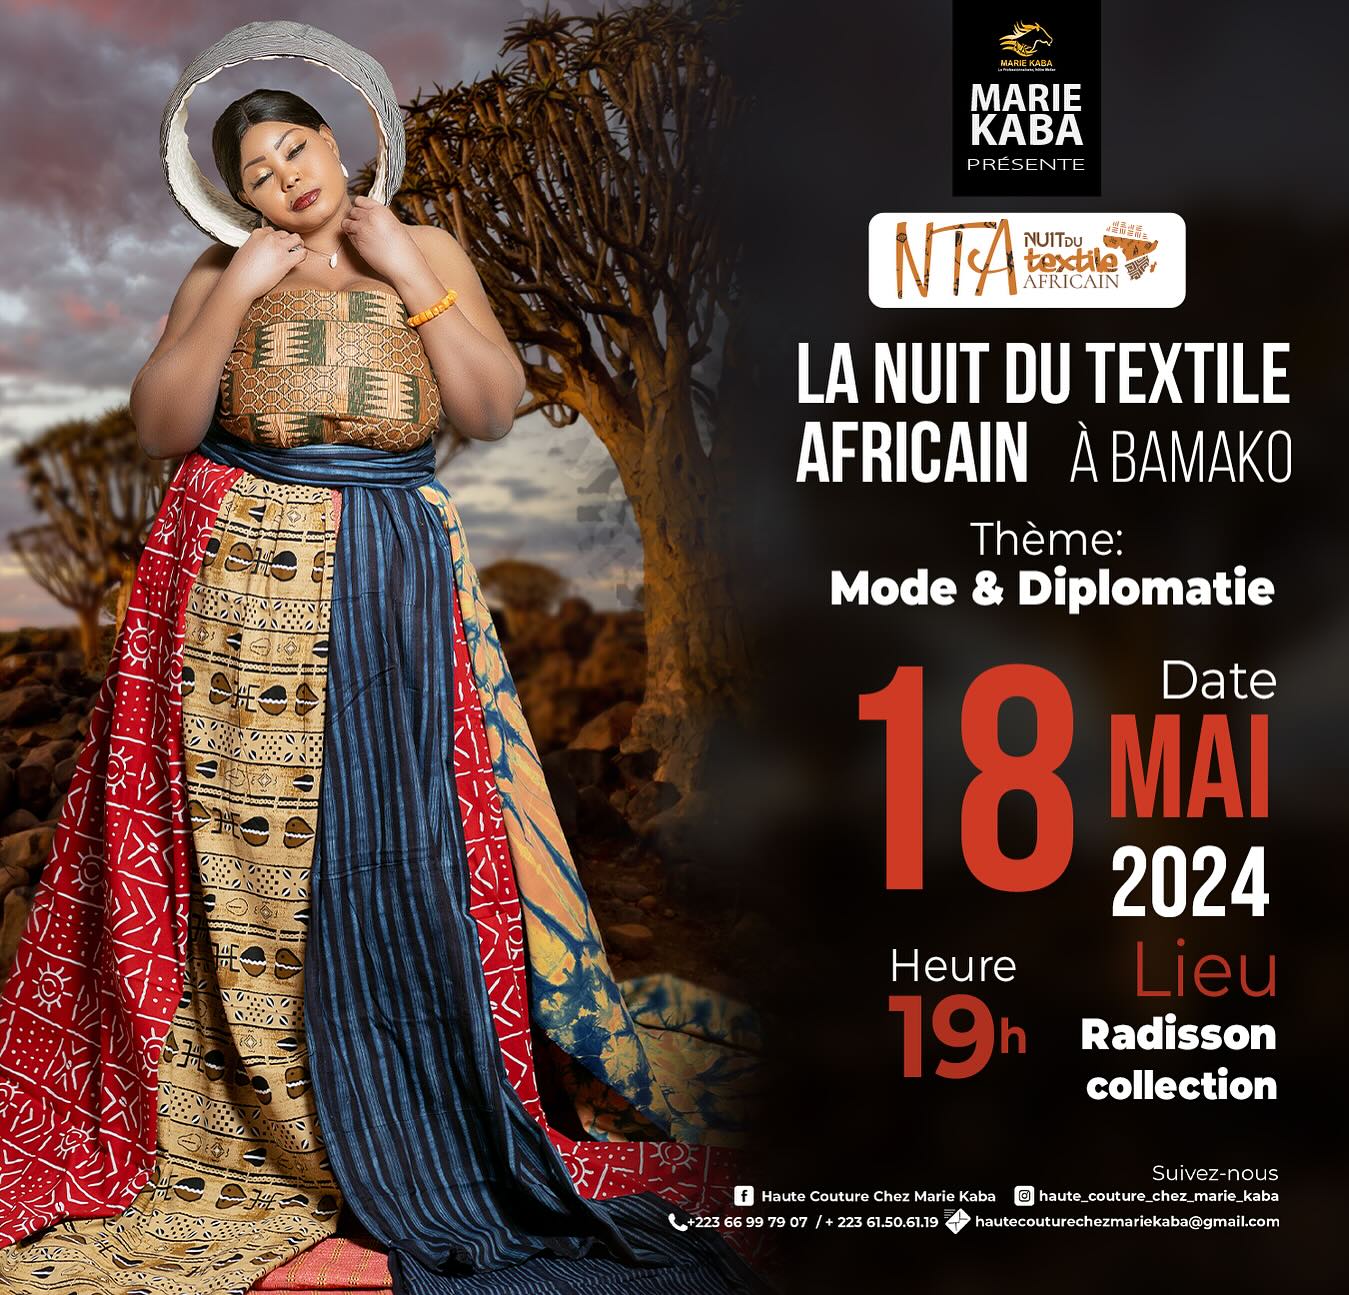 The fashion & diplomacy event theme - The Night of African Textile (NTA) by Marie KABA HAUTE COUTURE